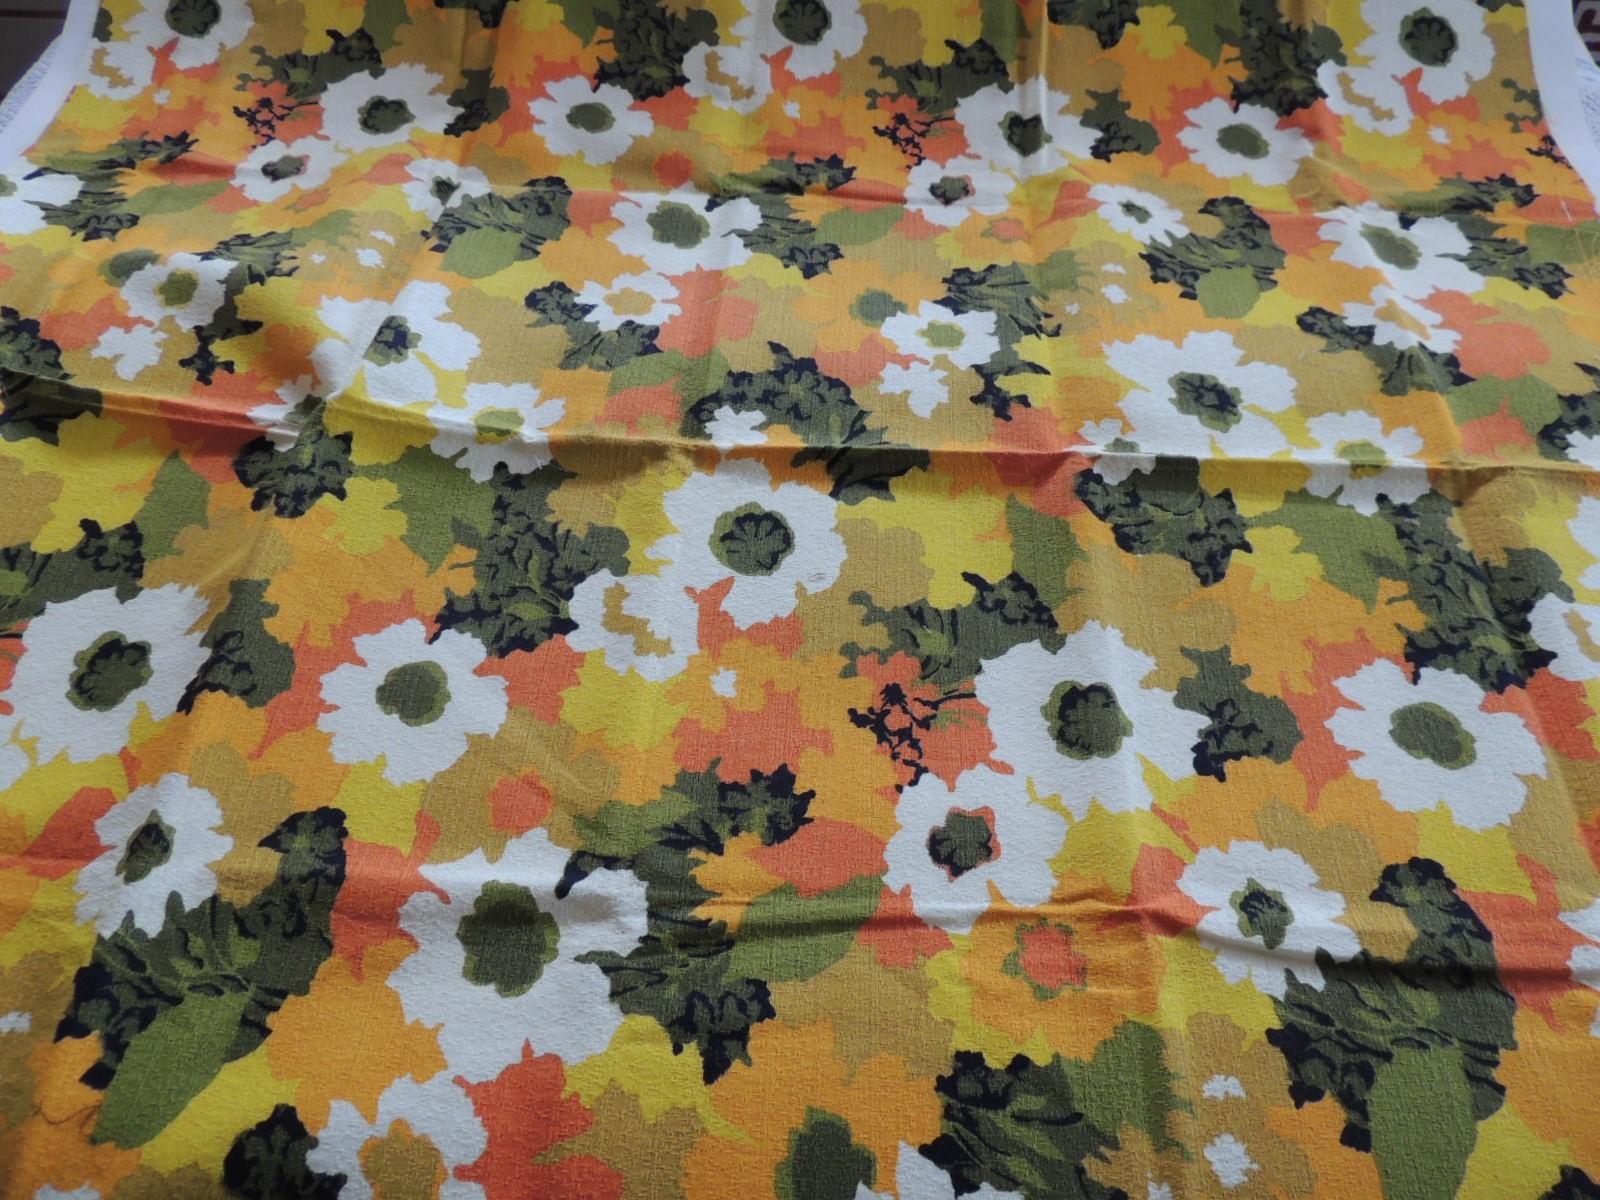 Fabric by the yard, Pop Art style colorful floral cotton fabric
Printed cotton.
Ideal for upholstery, pillows or shade.
Size: 46